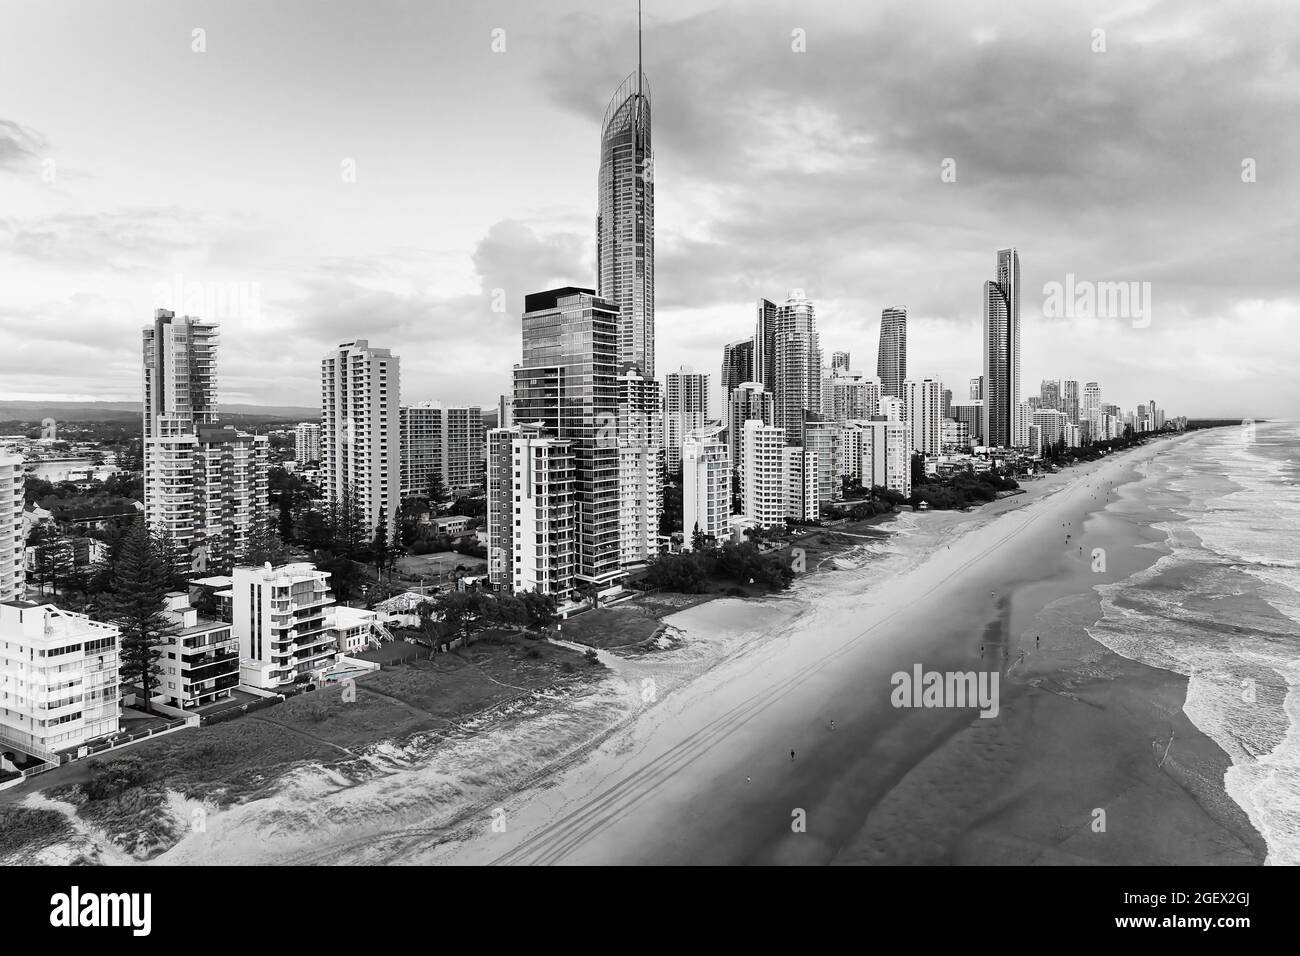 Moody cloudy cityscape of High-rise modern urban towers on waterfront of Surfers Paradise Pacific coast - Australian Gold Coast. Stock Photo